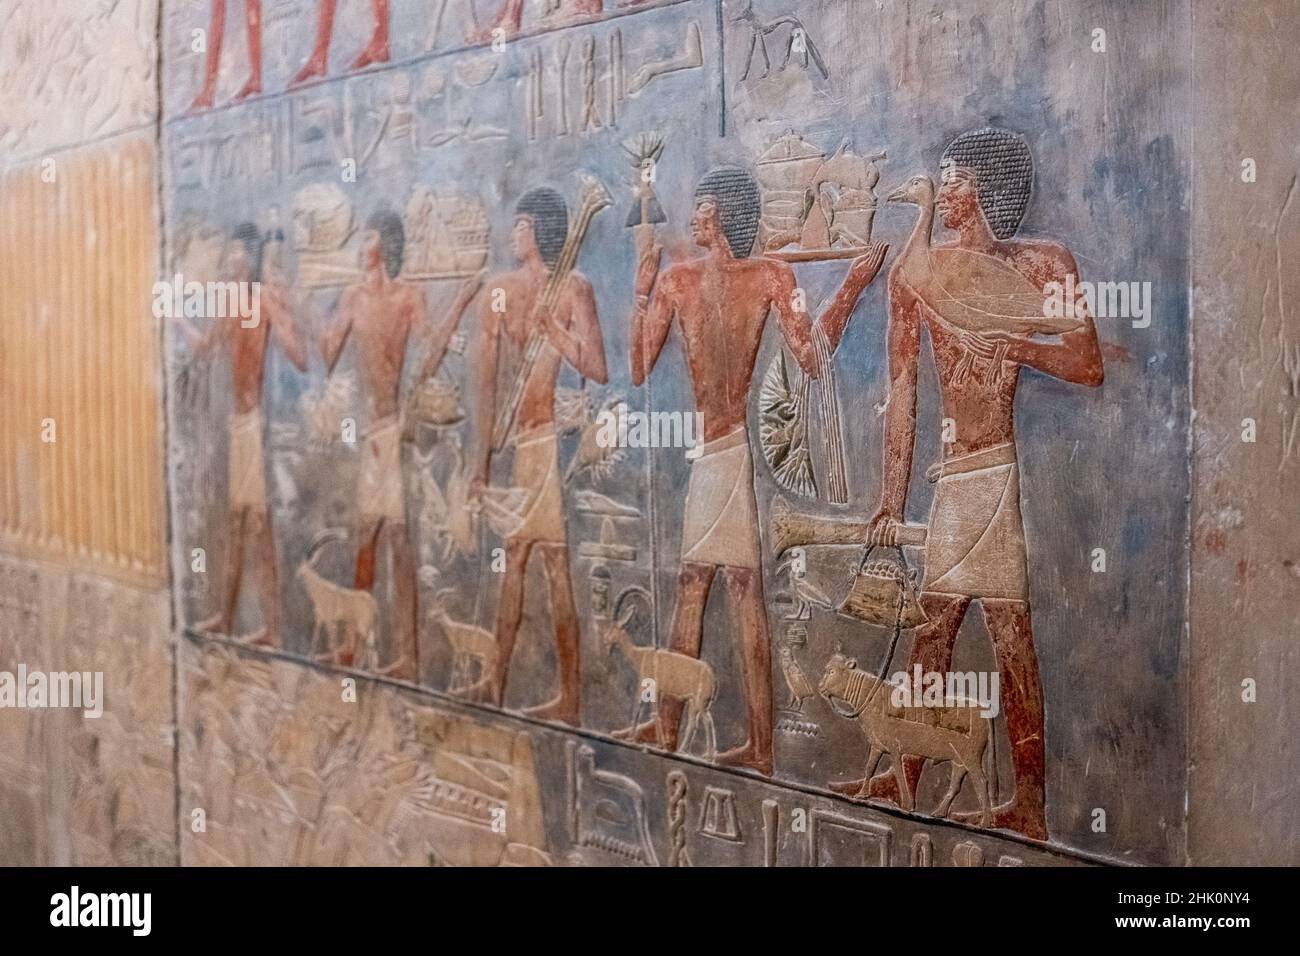 Cairo Egypt January 2022 Hieroglyph fresceos of people doing things on the walls of a tomb inside a pyramid in egypt Stock Photo